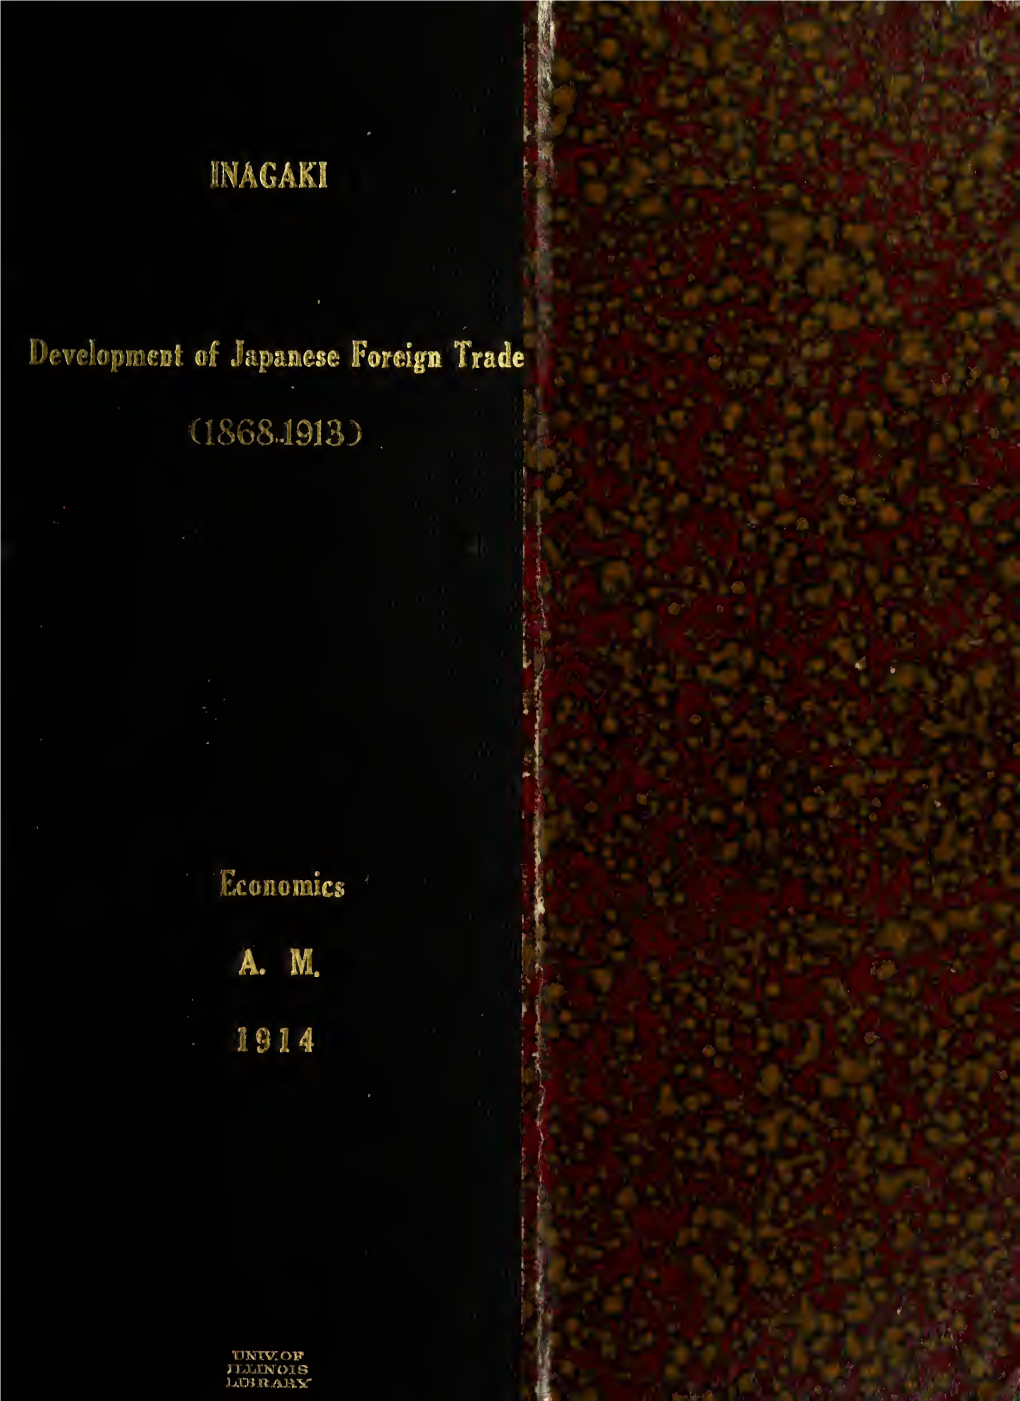 Development of Japanese Foreign Trade (1868-1913)